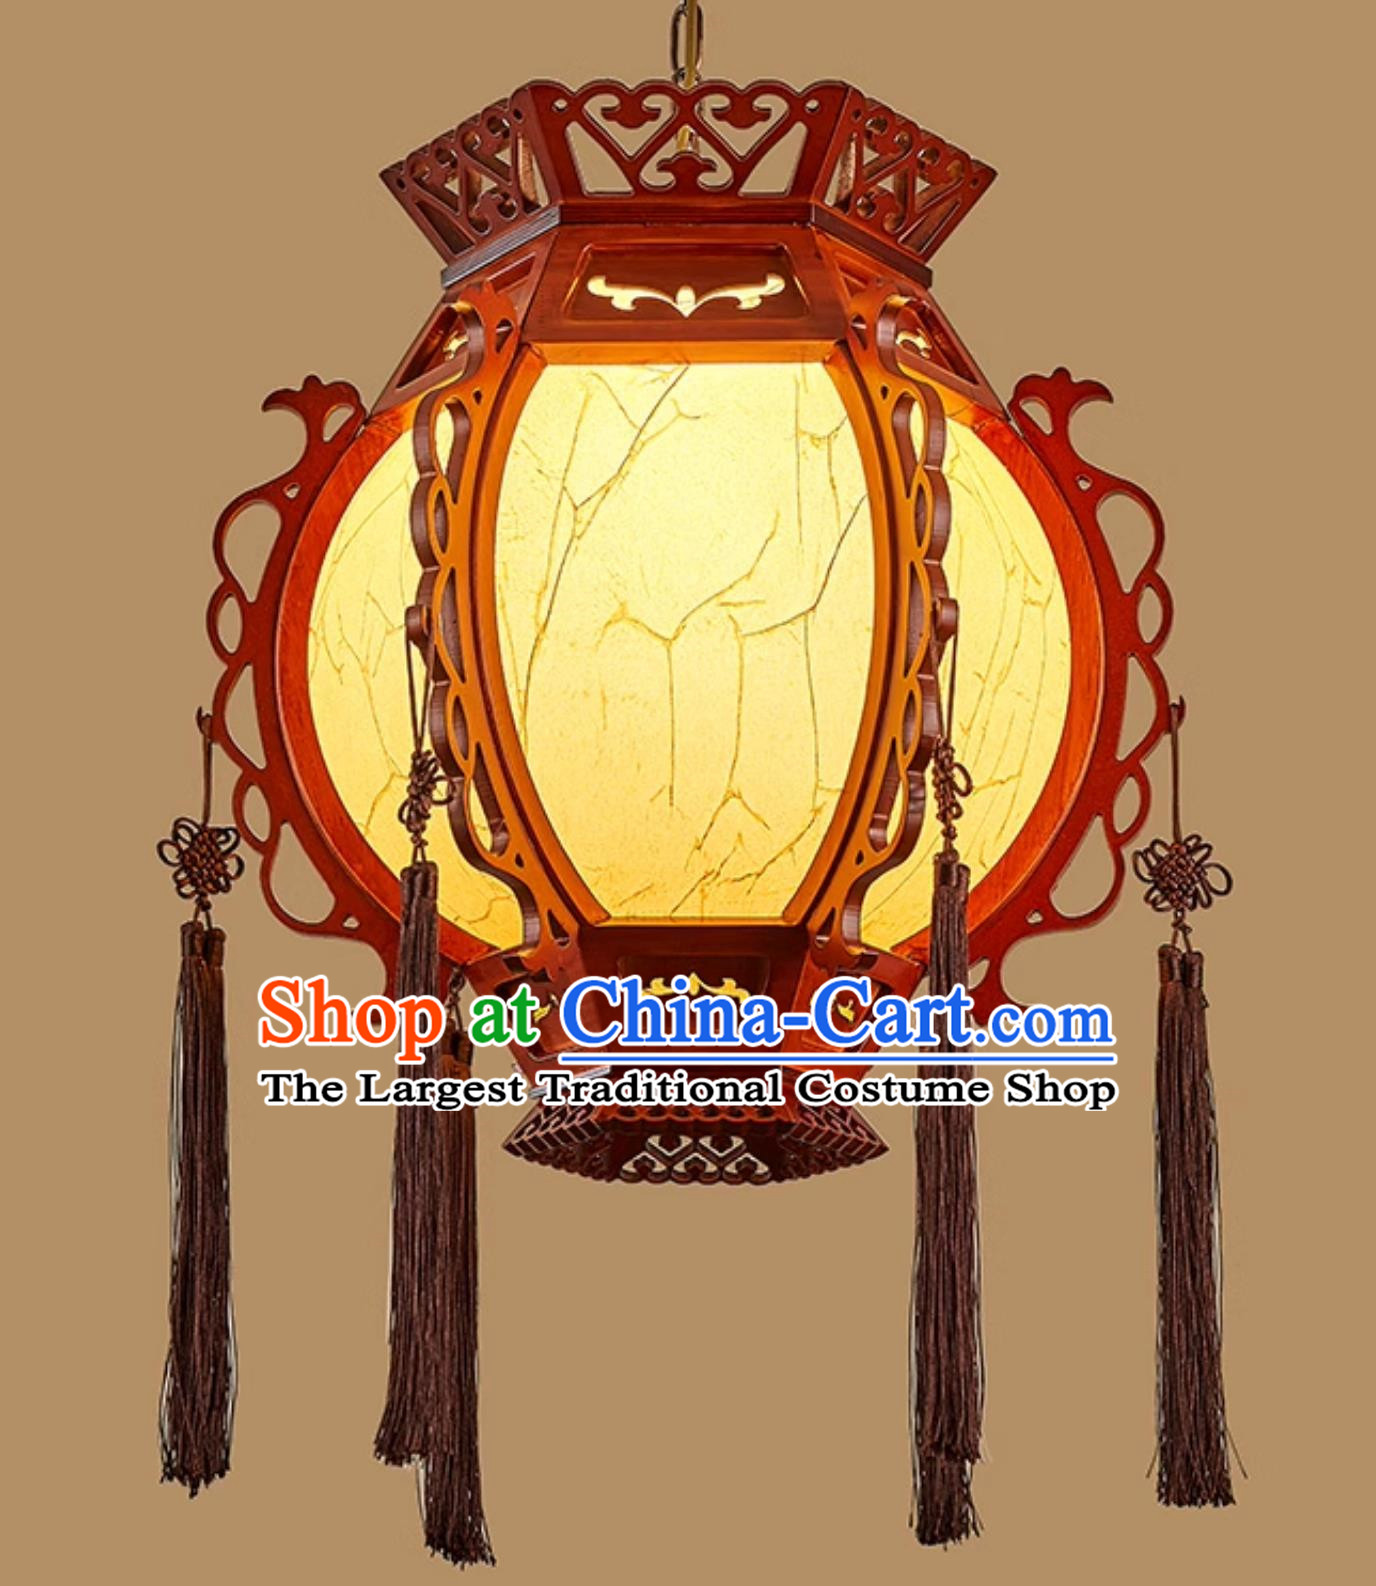 18 Inches Diameter Chinese Lantern Classical Palace Lantern Red Festive Housewarming Balcony Light Solid Wood Corridor Aisle Courtyard Door Chandelier